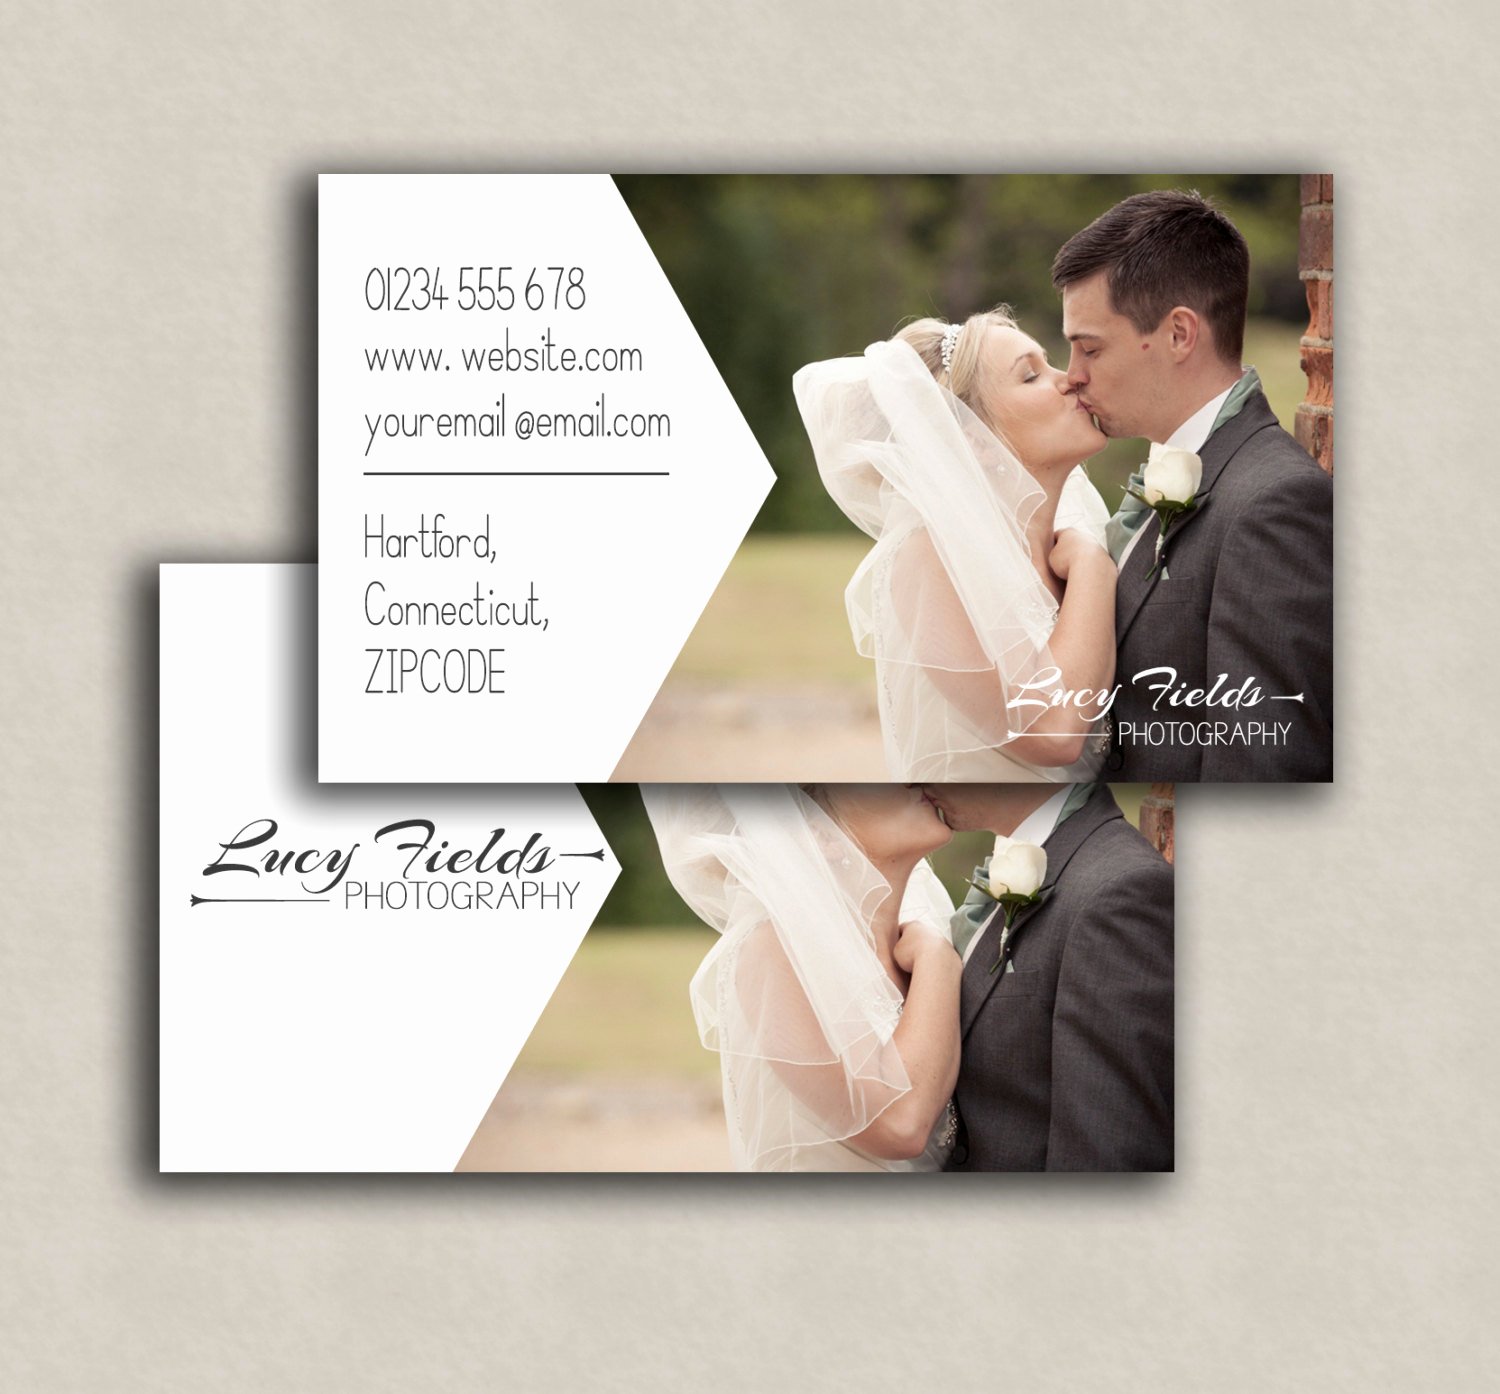 Wedding Photography Business Cards Unique Business Card Template Photoshop Marketing Card Double Sided Psd Photography Business Cards